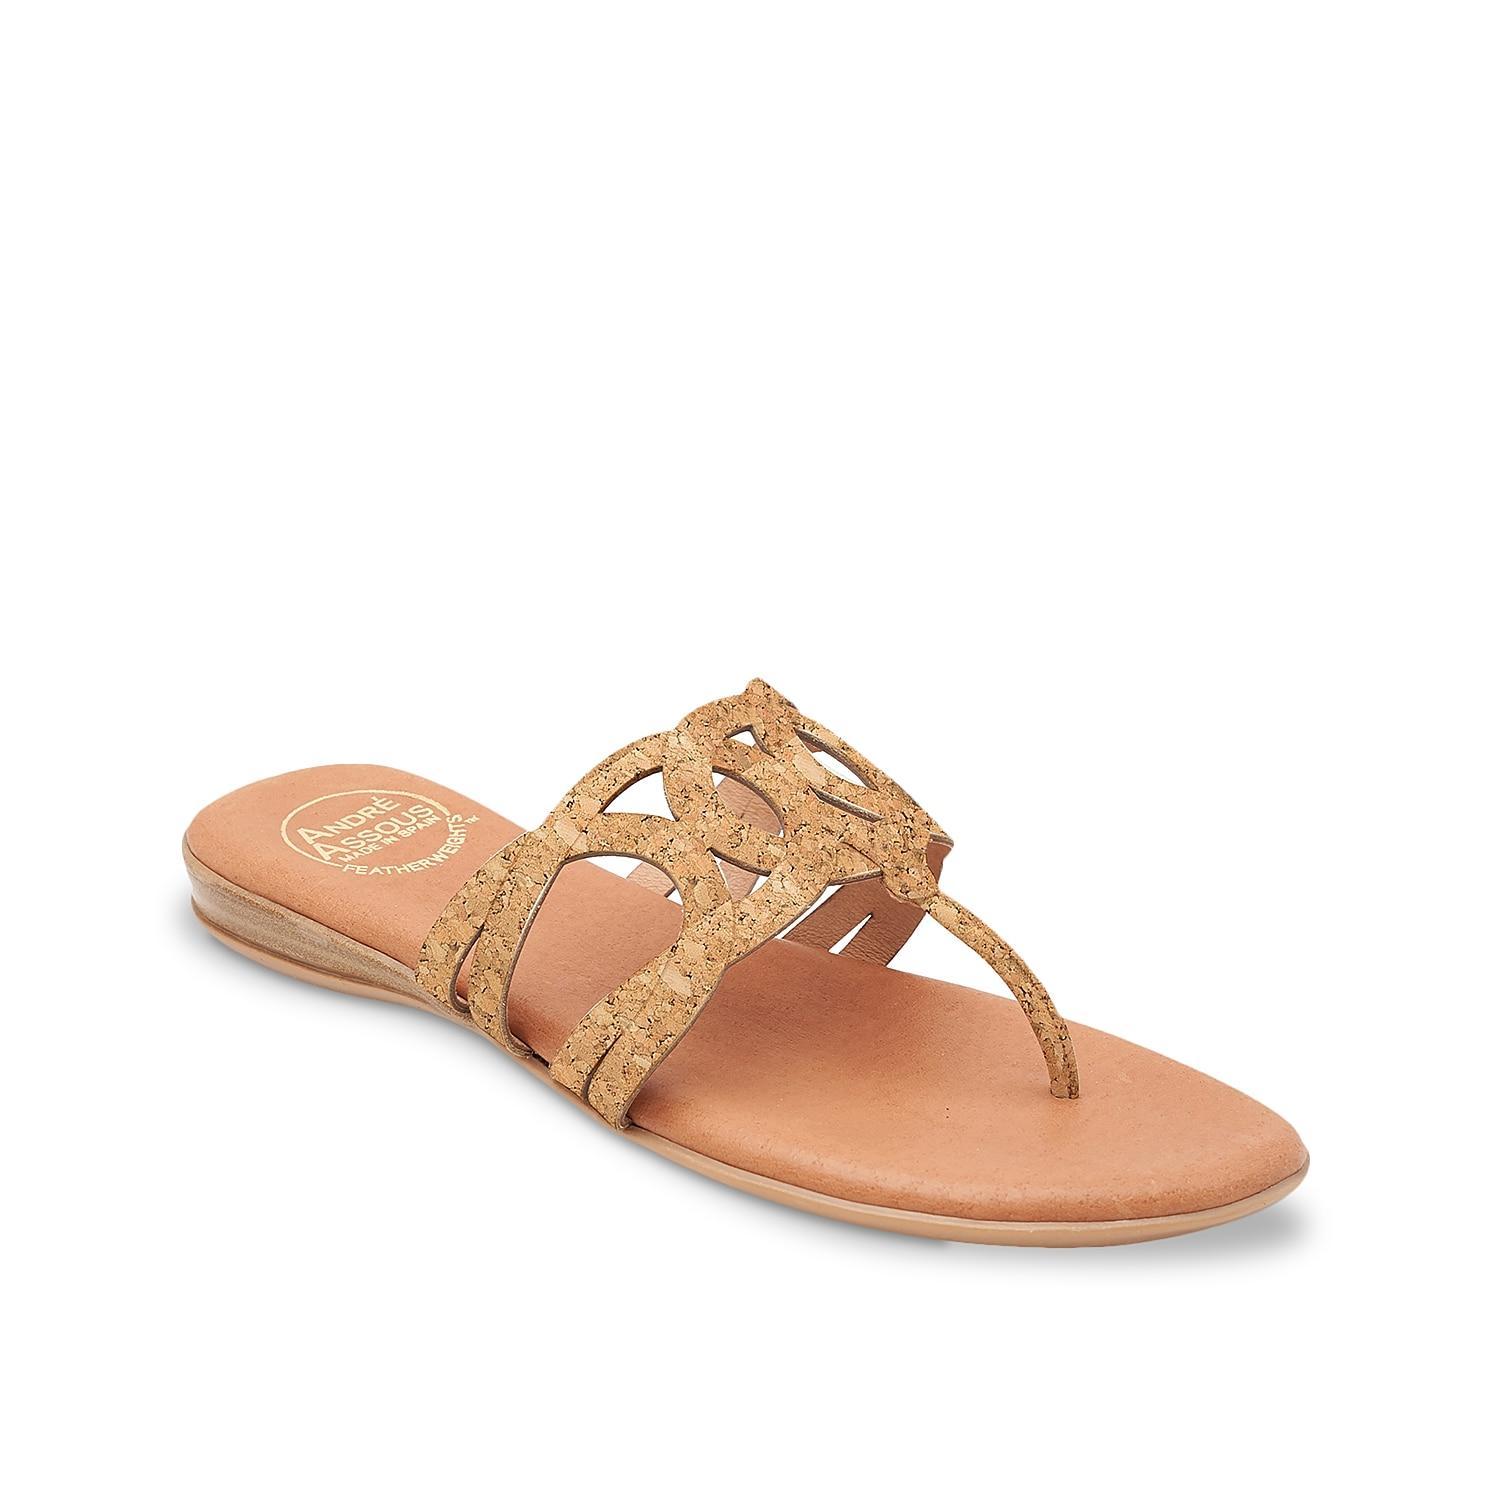 Andr Assous Nature Sandal Product Image